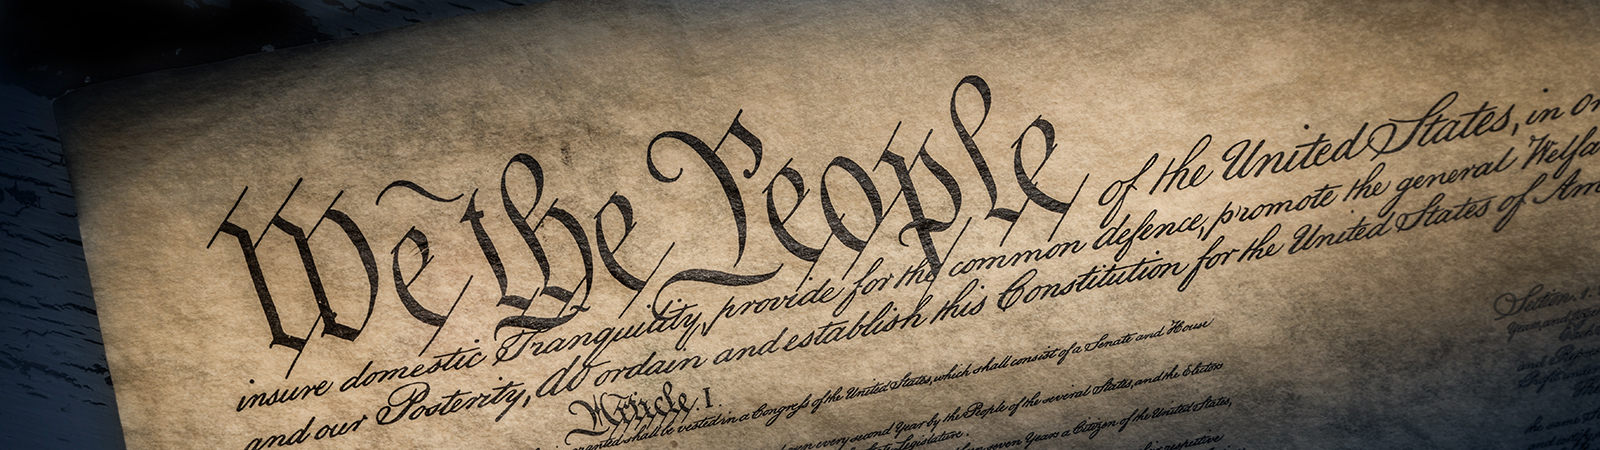 We the People on a paper copy of the U.S. constitution